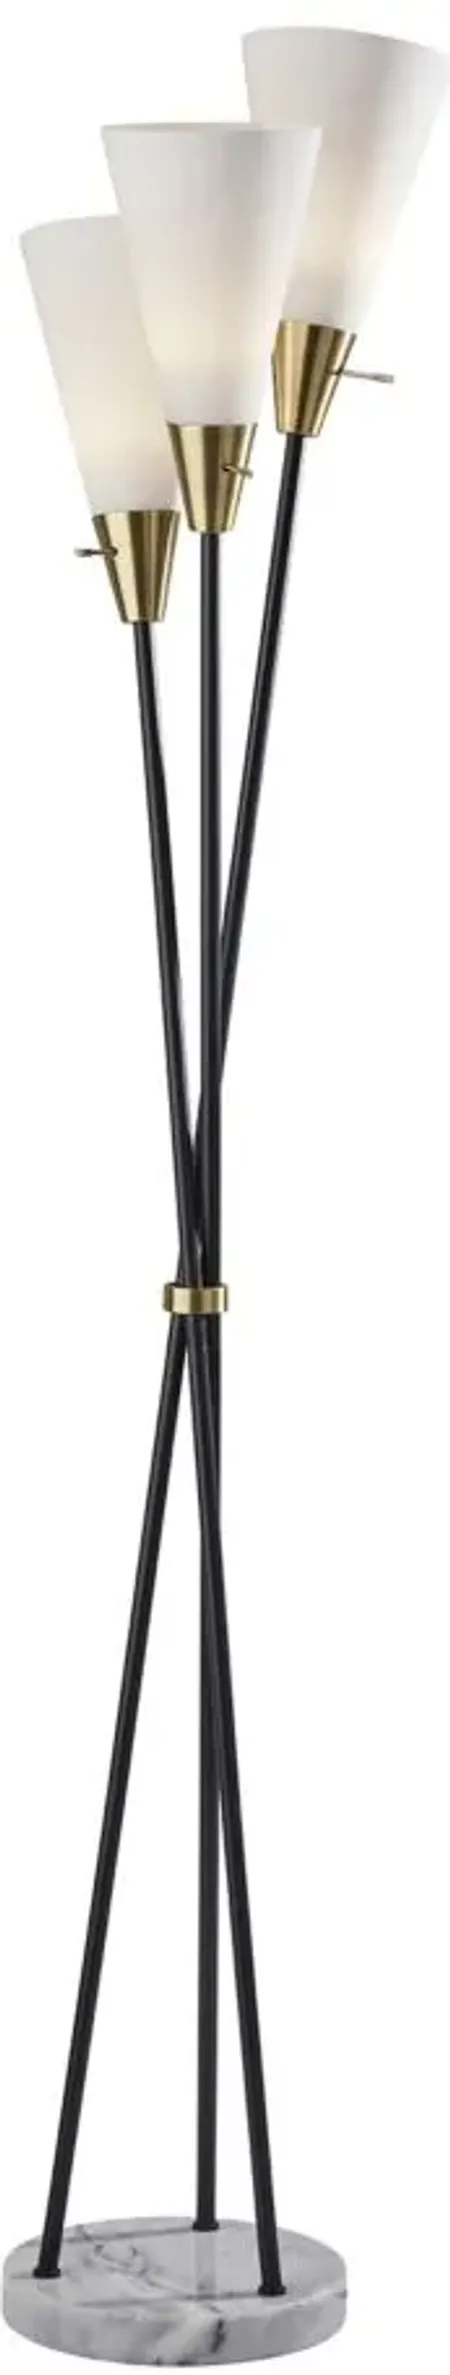 Dixon 3 Light Torchiere Lamp in Black w. Antique Brass accents by Adesso Inc